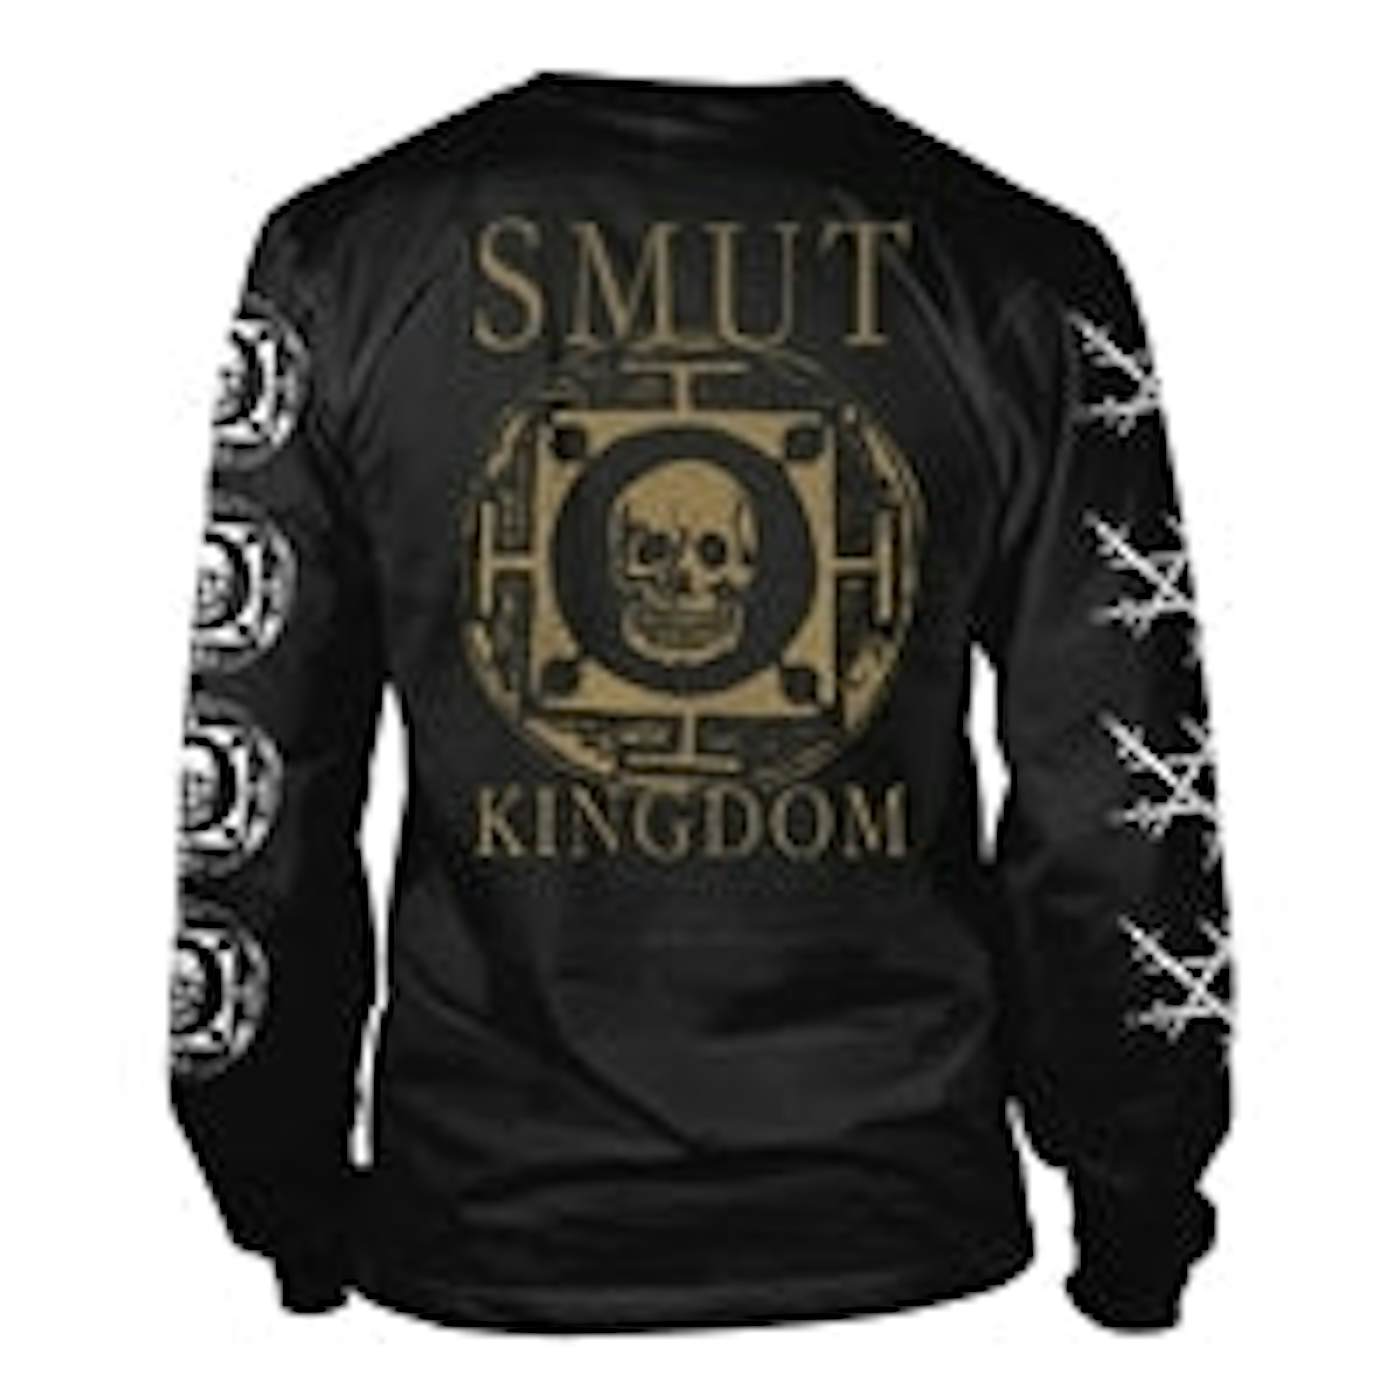 Pungent Stench Long Sleeve T Shirt - Smut Kingdom 2